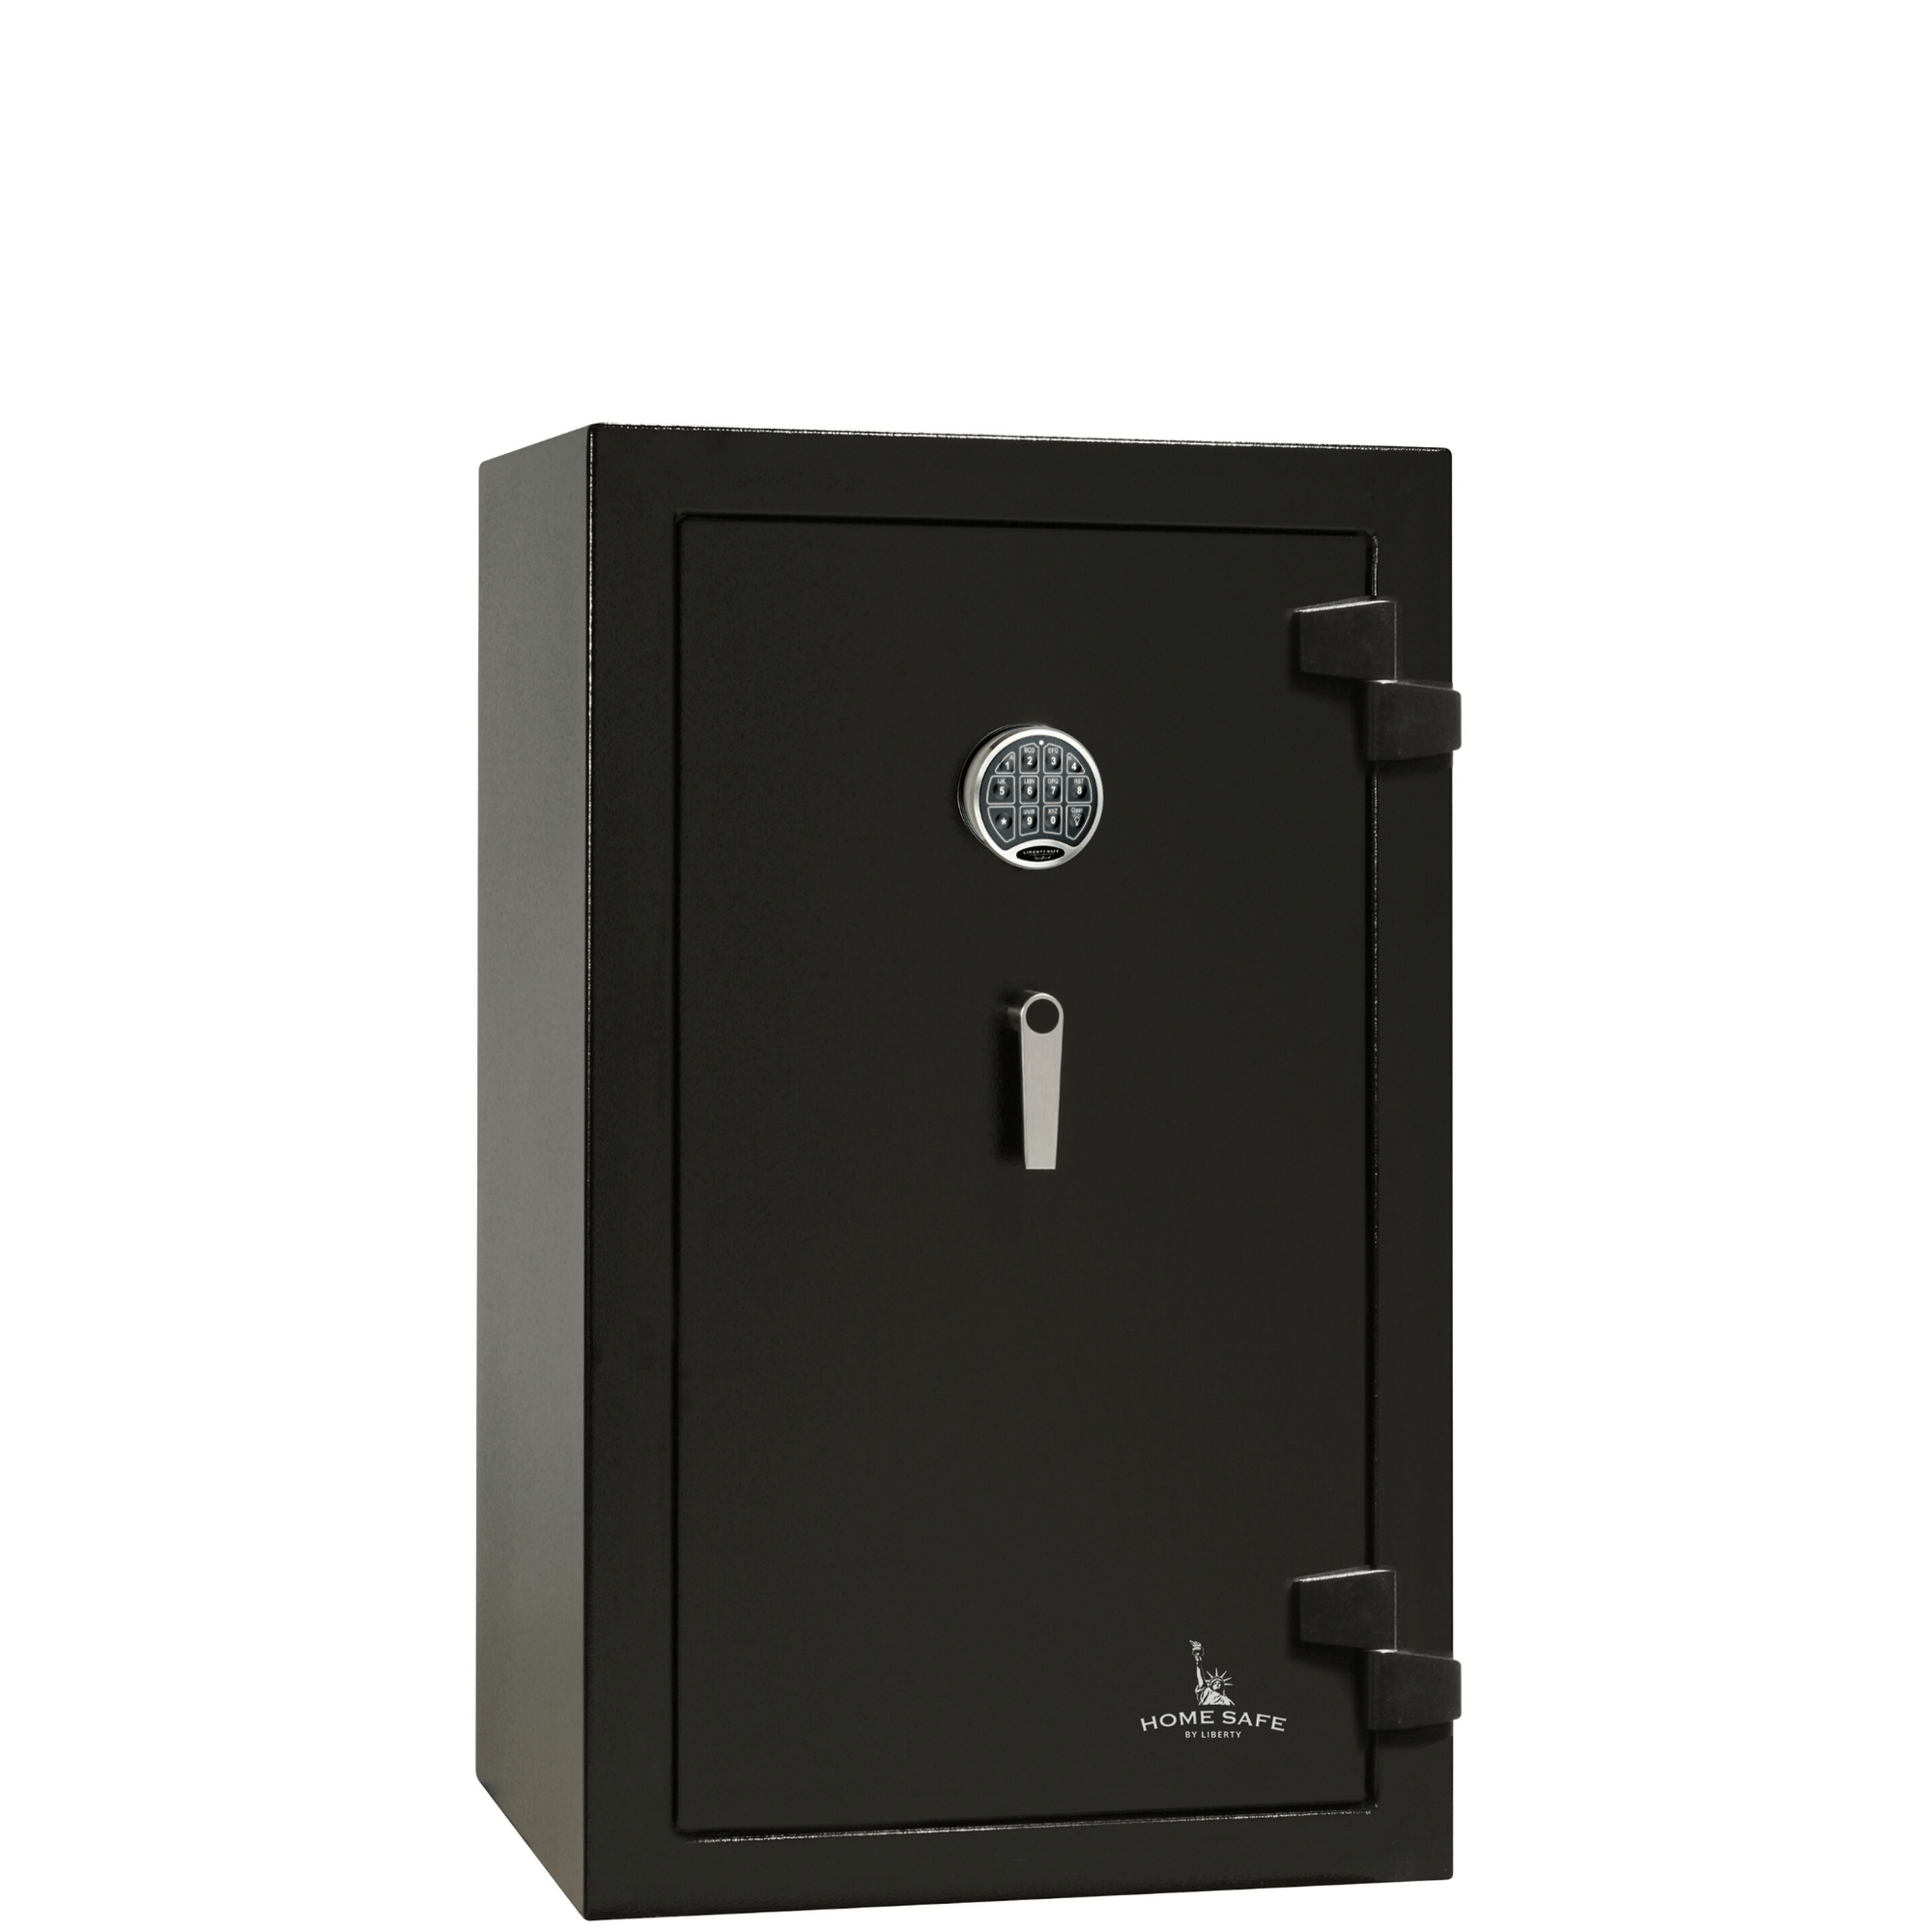 Home Safe | 12 | 60 Minute Fire Protection | Black | Electronic Lock | Dimensions: 42"(H) x 24.25"(W) x 22"(D) | Liberty Safe Norcal.